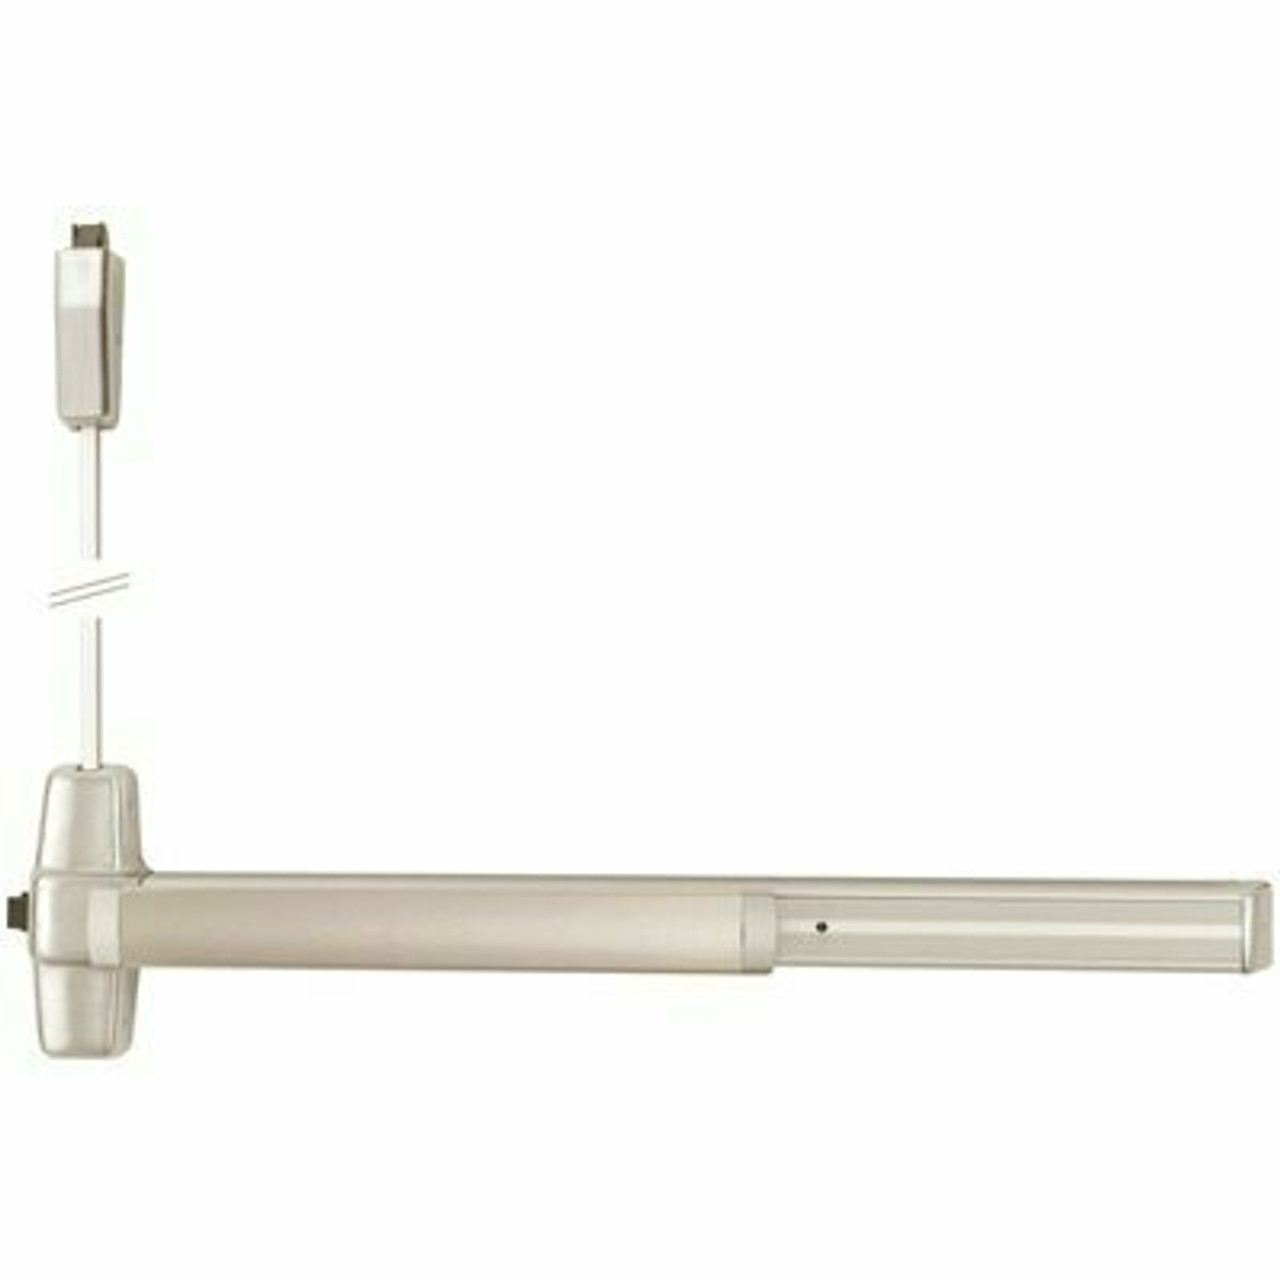 Von Duprin 99 Series 3 Ft. Surface-Mounted Vertical Rod Exit Only Device